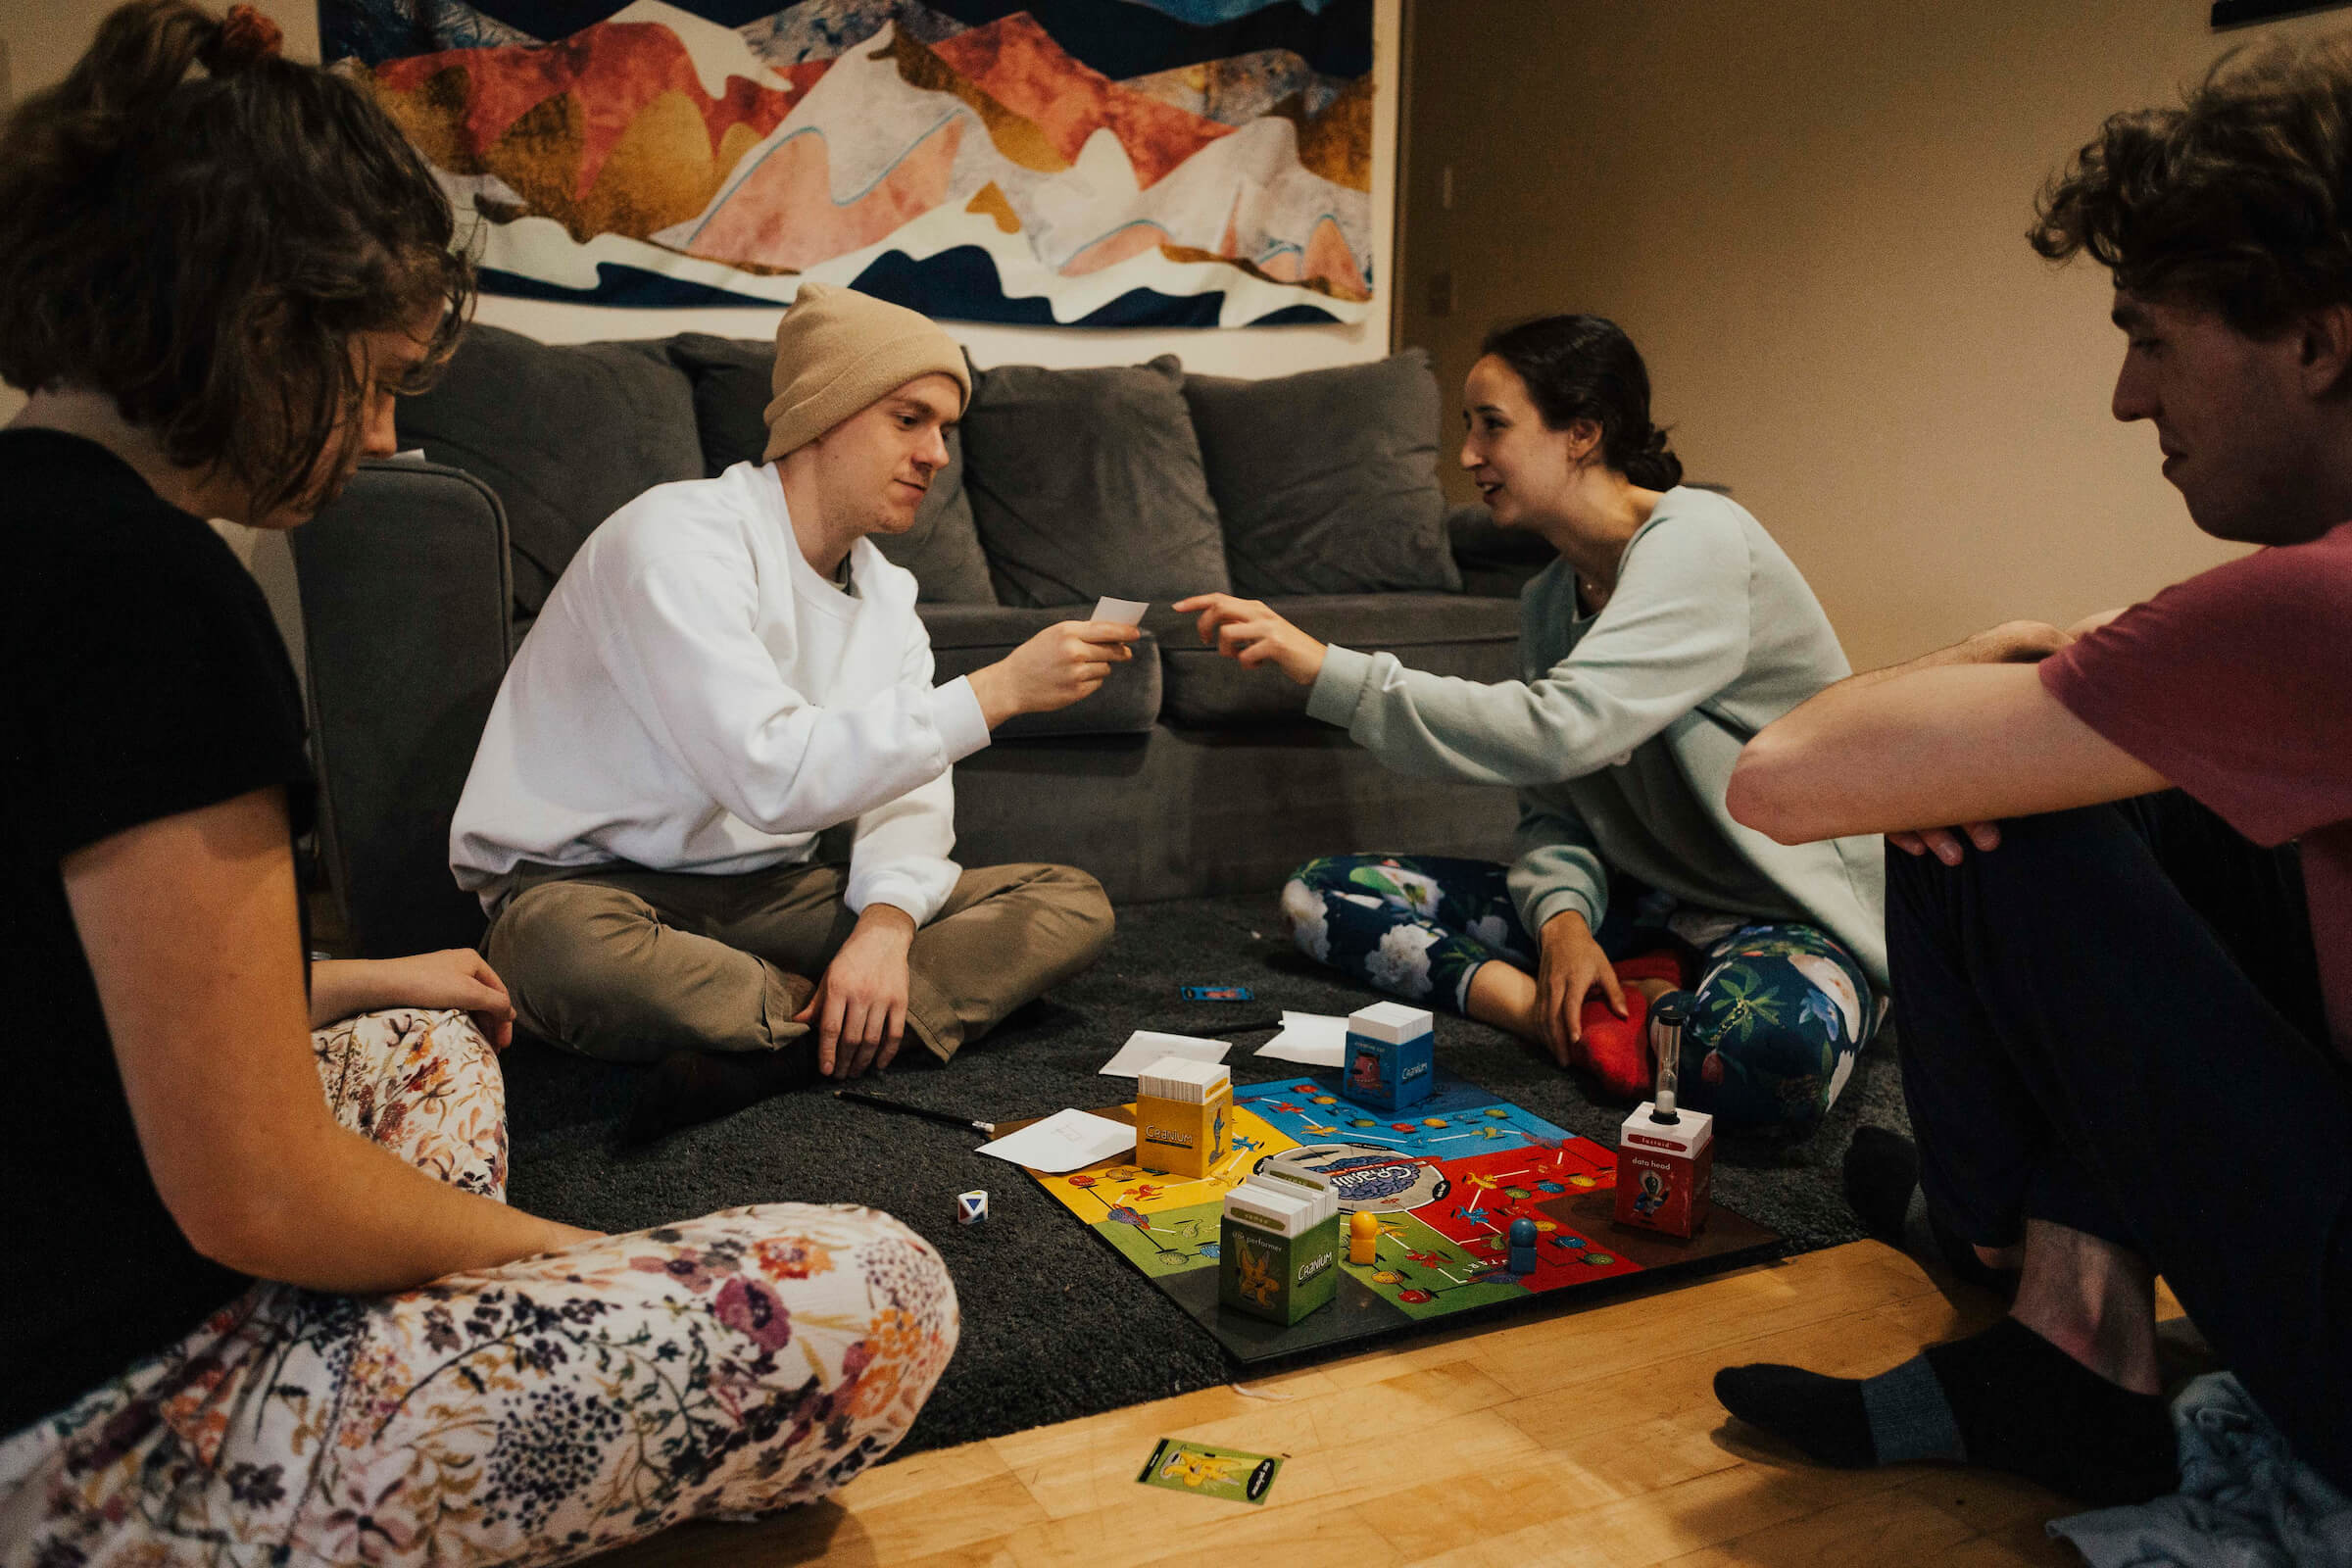 Hallie and her 3 roommates have a game night together at home